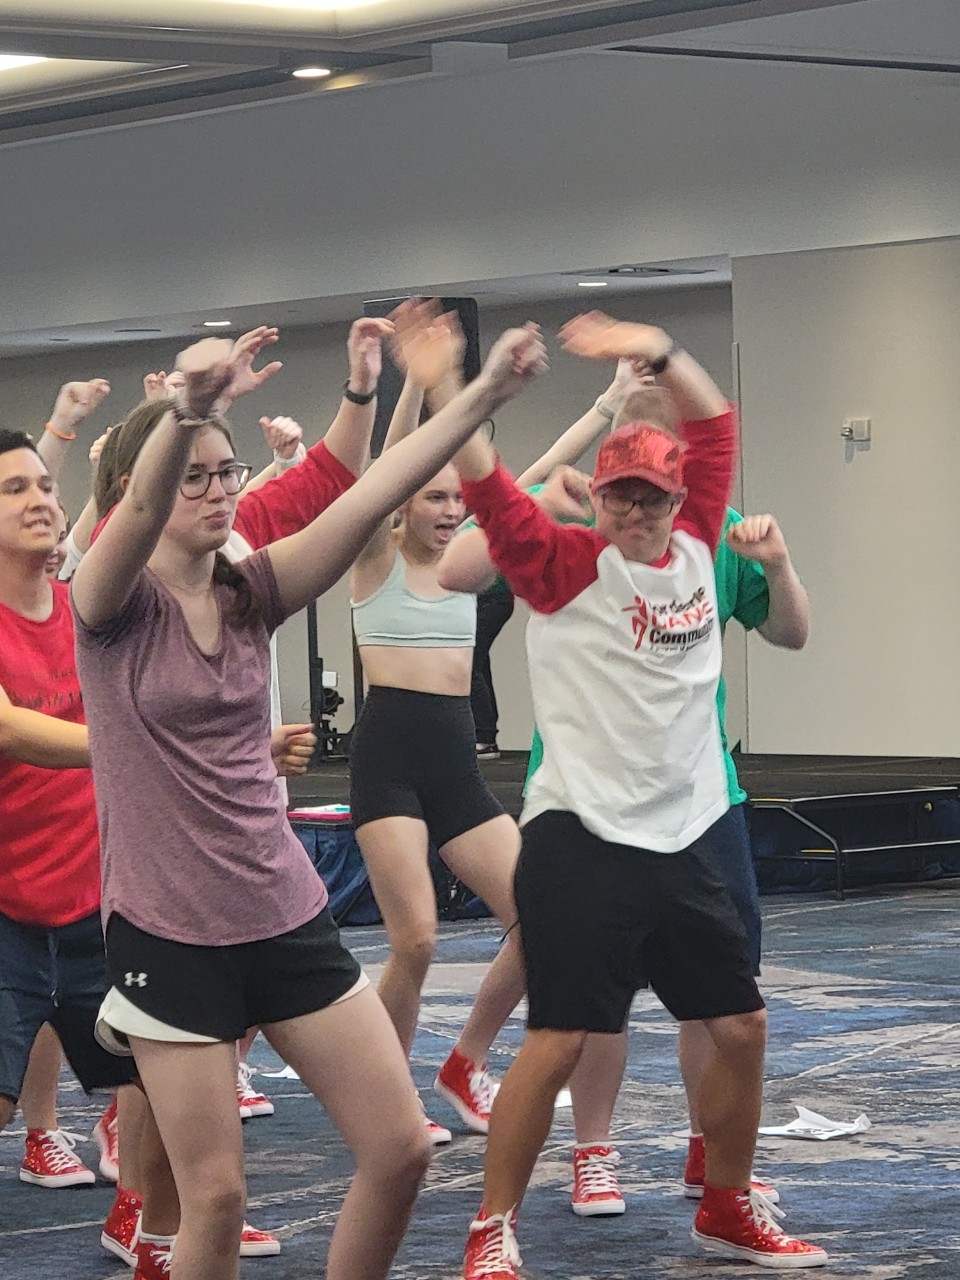 dancers in athletic gear doing coordinated dance moves during rehearsal.